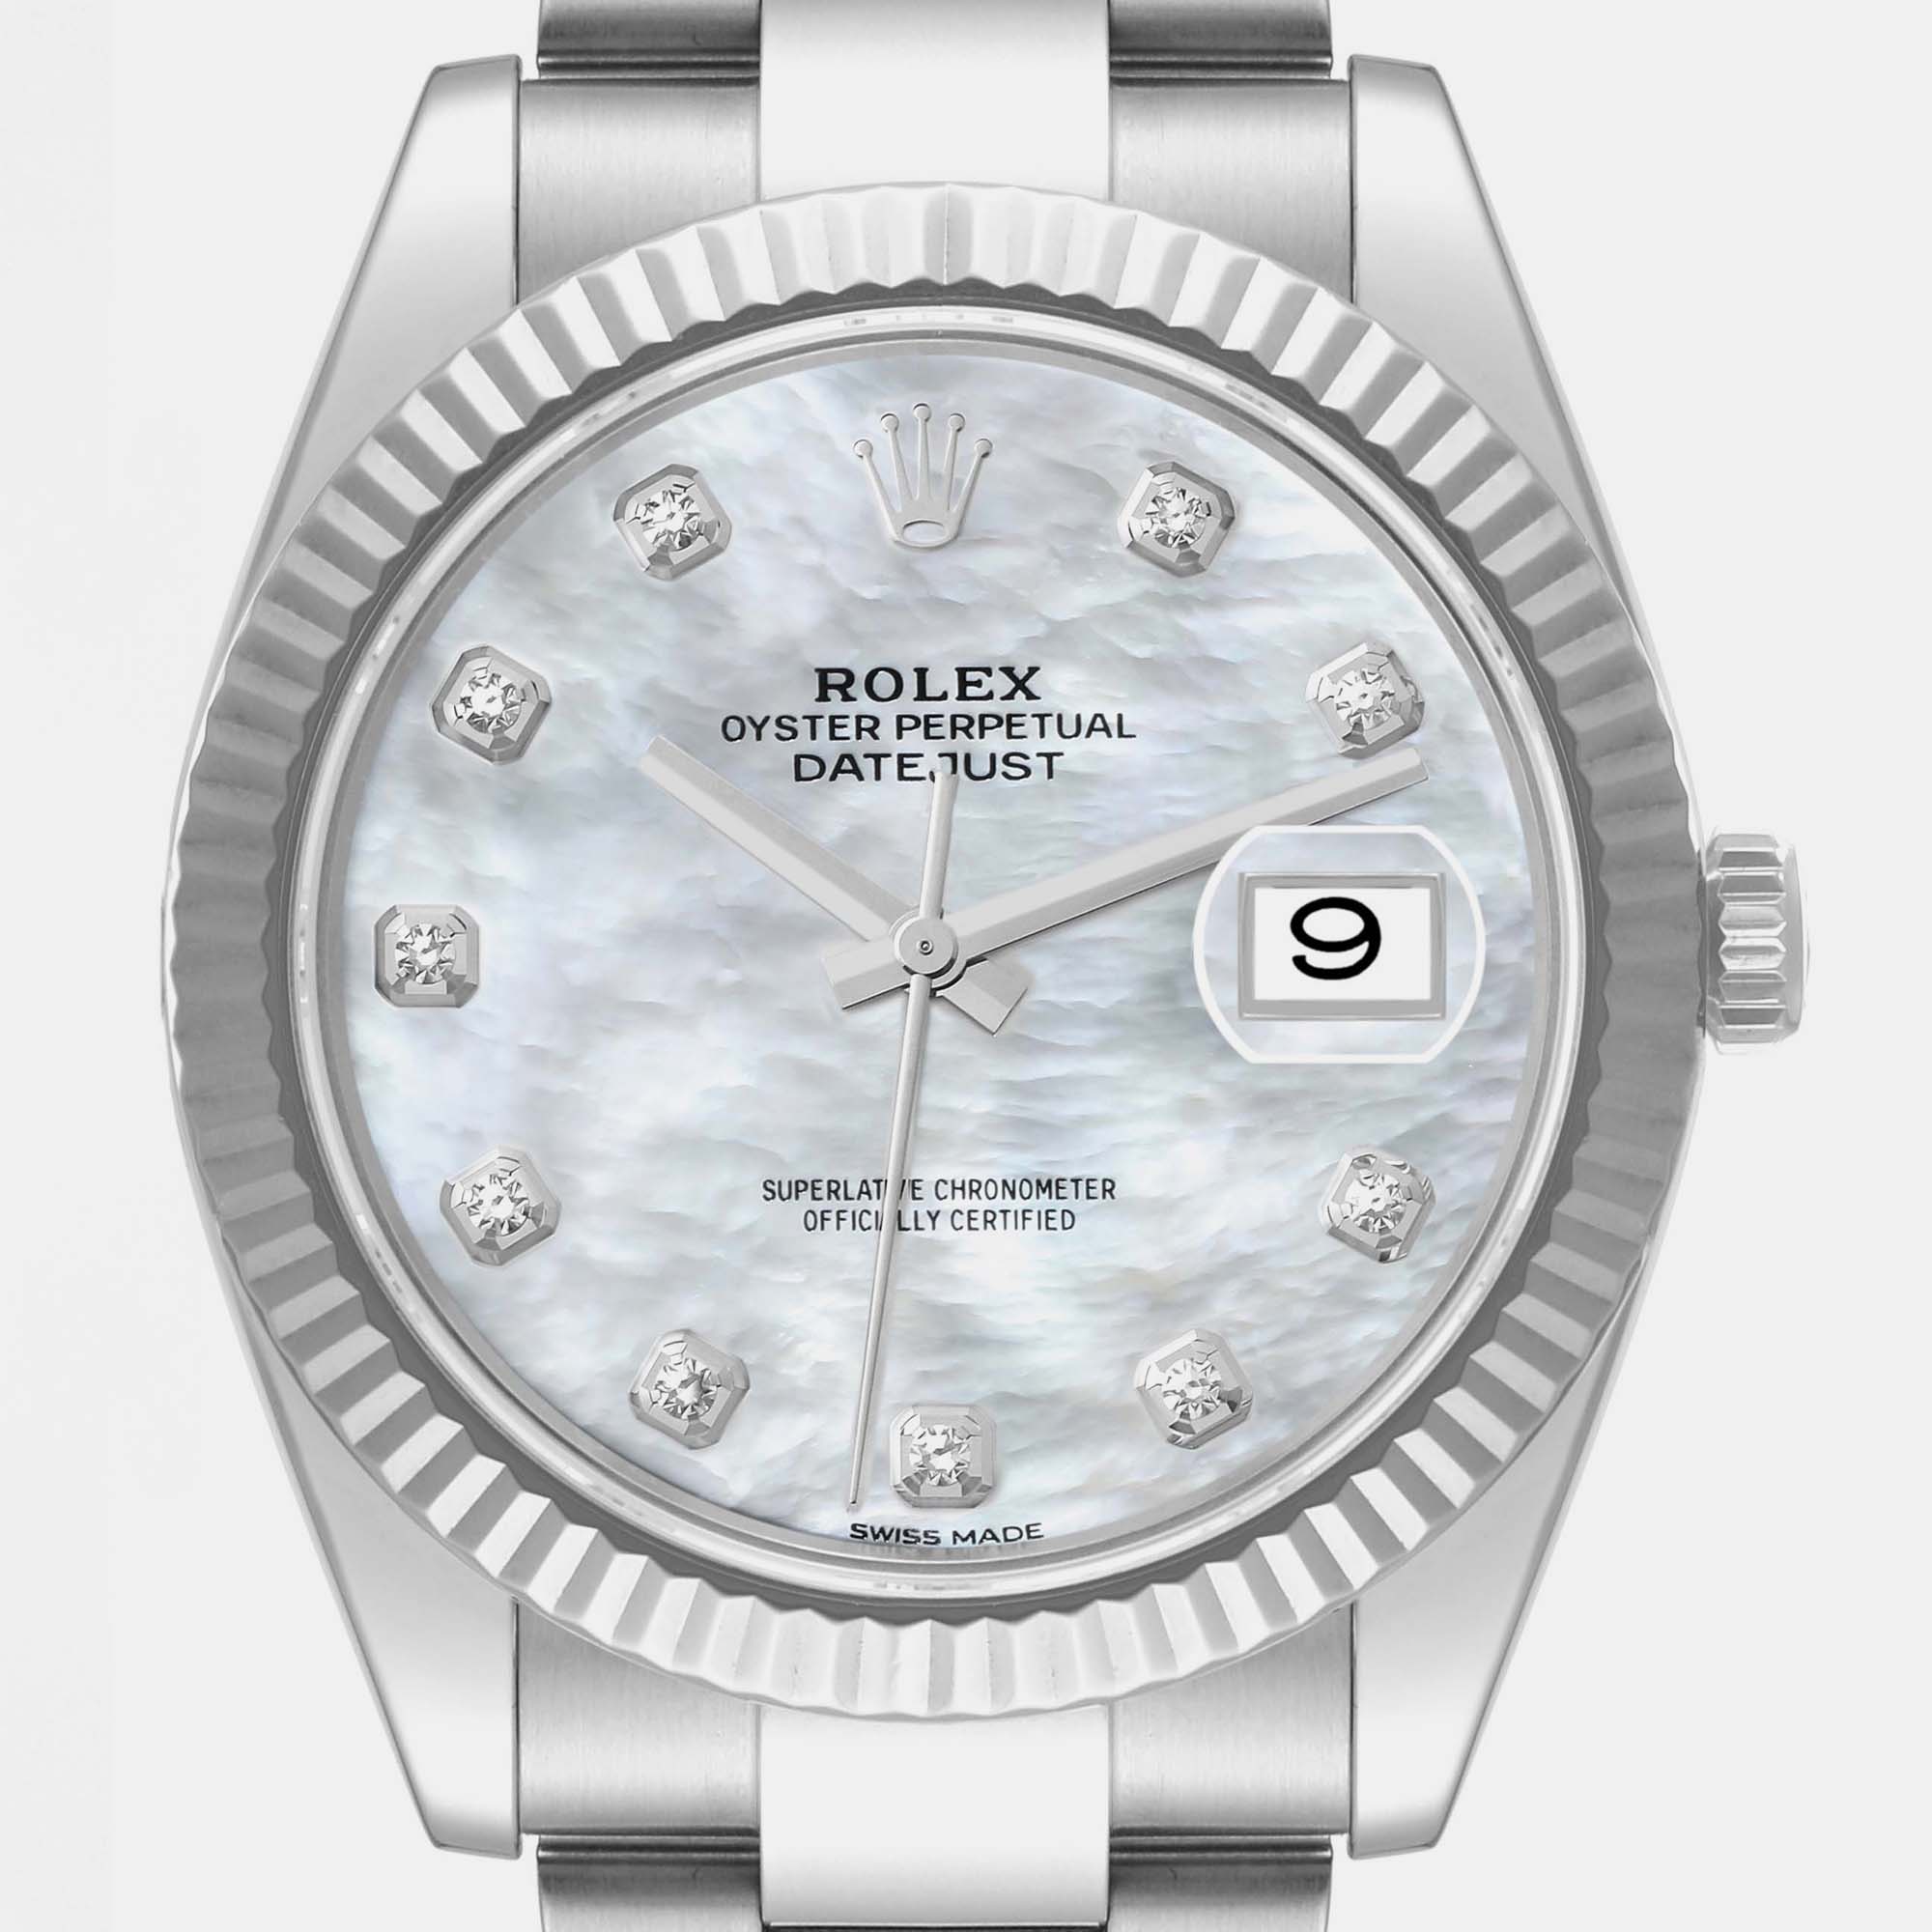 Rolex Datejust Steel White Gold Mother Of Pearl Diamond Dial Men's Watch 126334 41 Mm